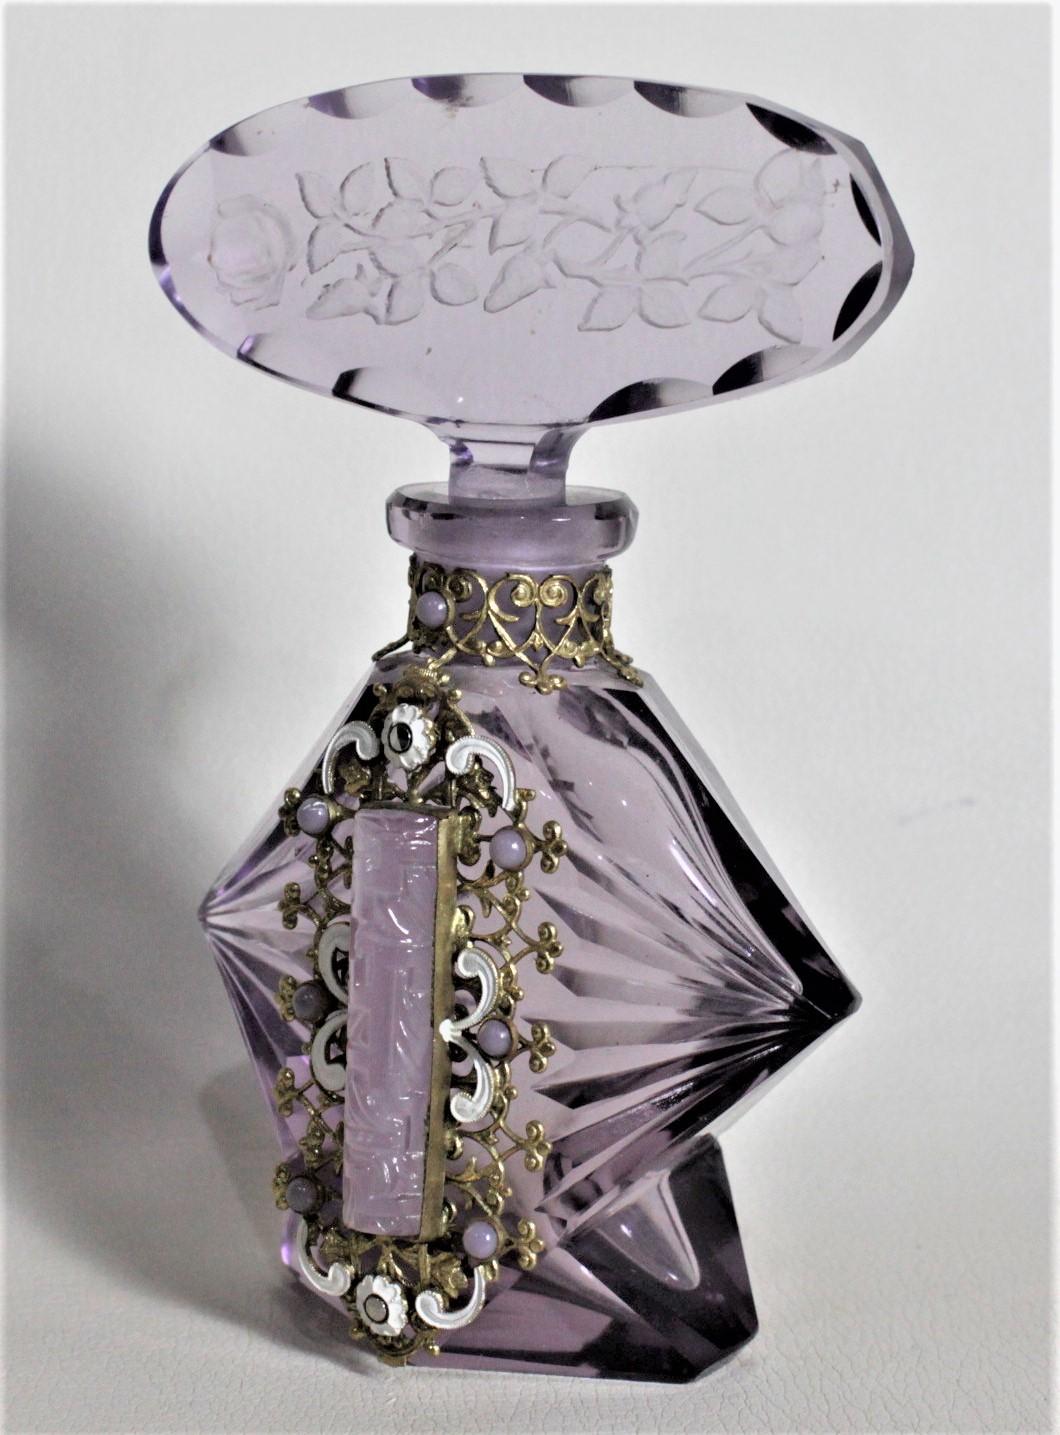 This Art Deco perfume or scent bottle is unsigned but presumed to have been made in Bohemia in approximately 1935. The glass is a deep purple with deep faceted sides and etched and cut top. The bottle features an ornate gold toned filigree collar